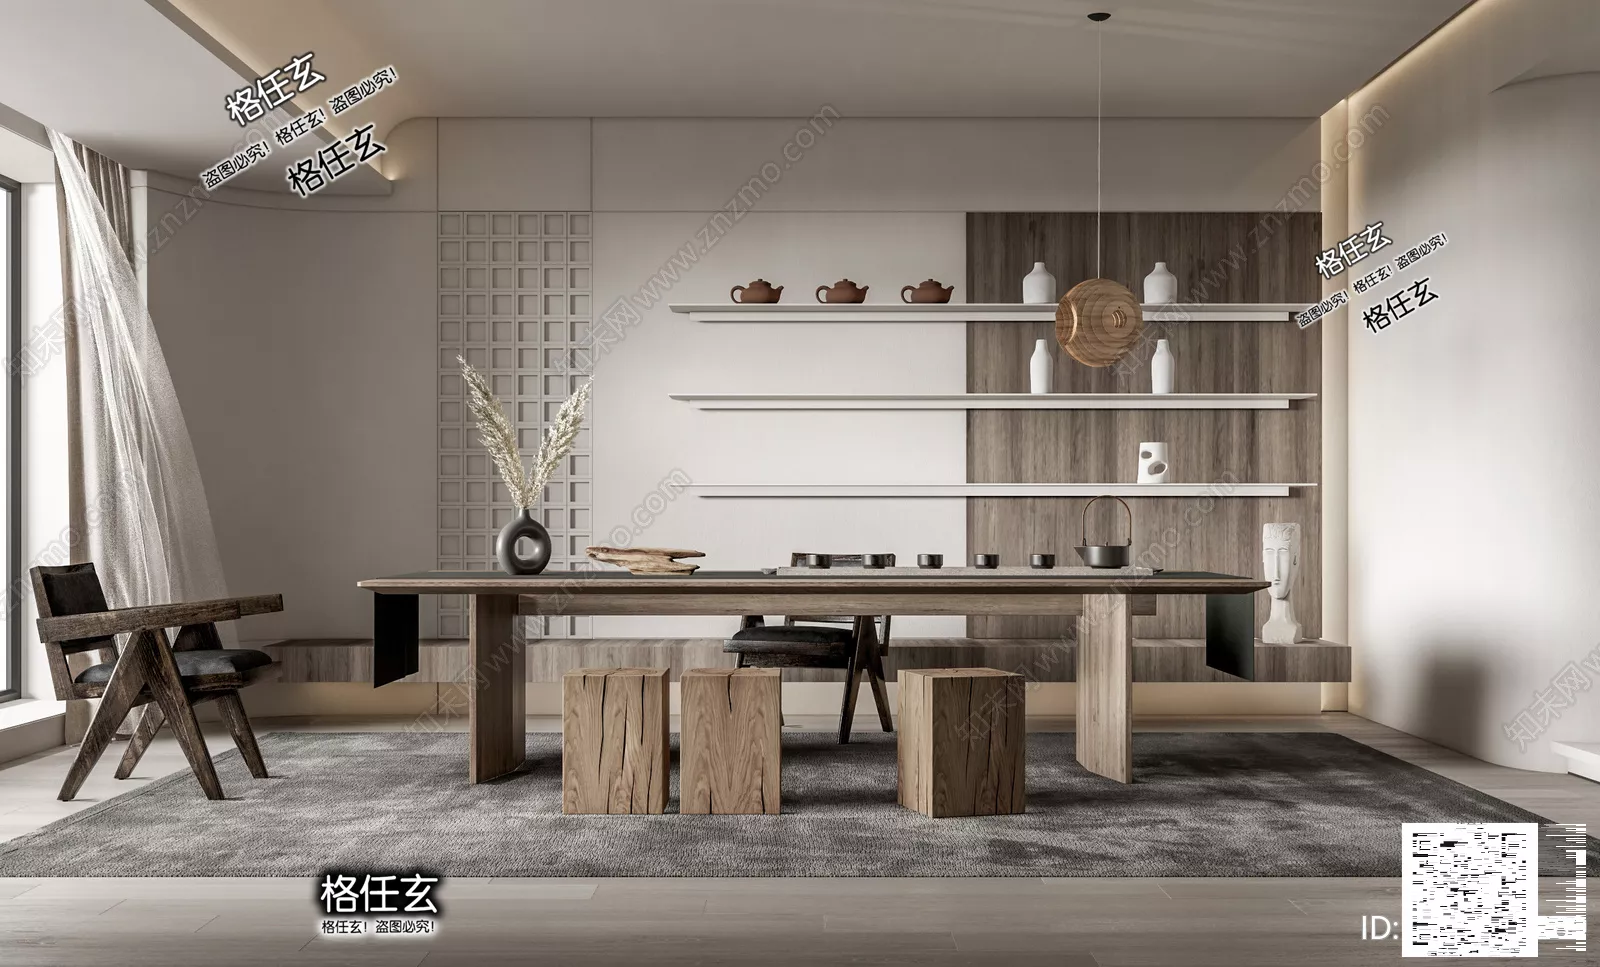 WABI SABI INTERIOR COLLECTION - SKETCHUP 3D SCENE - VRAY OR ENSCAPE - ID17776